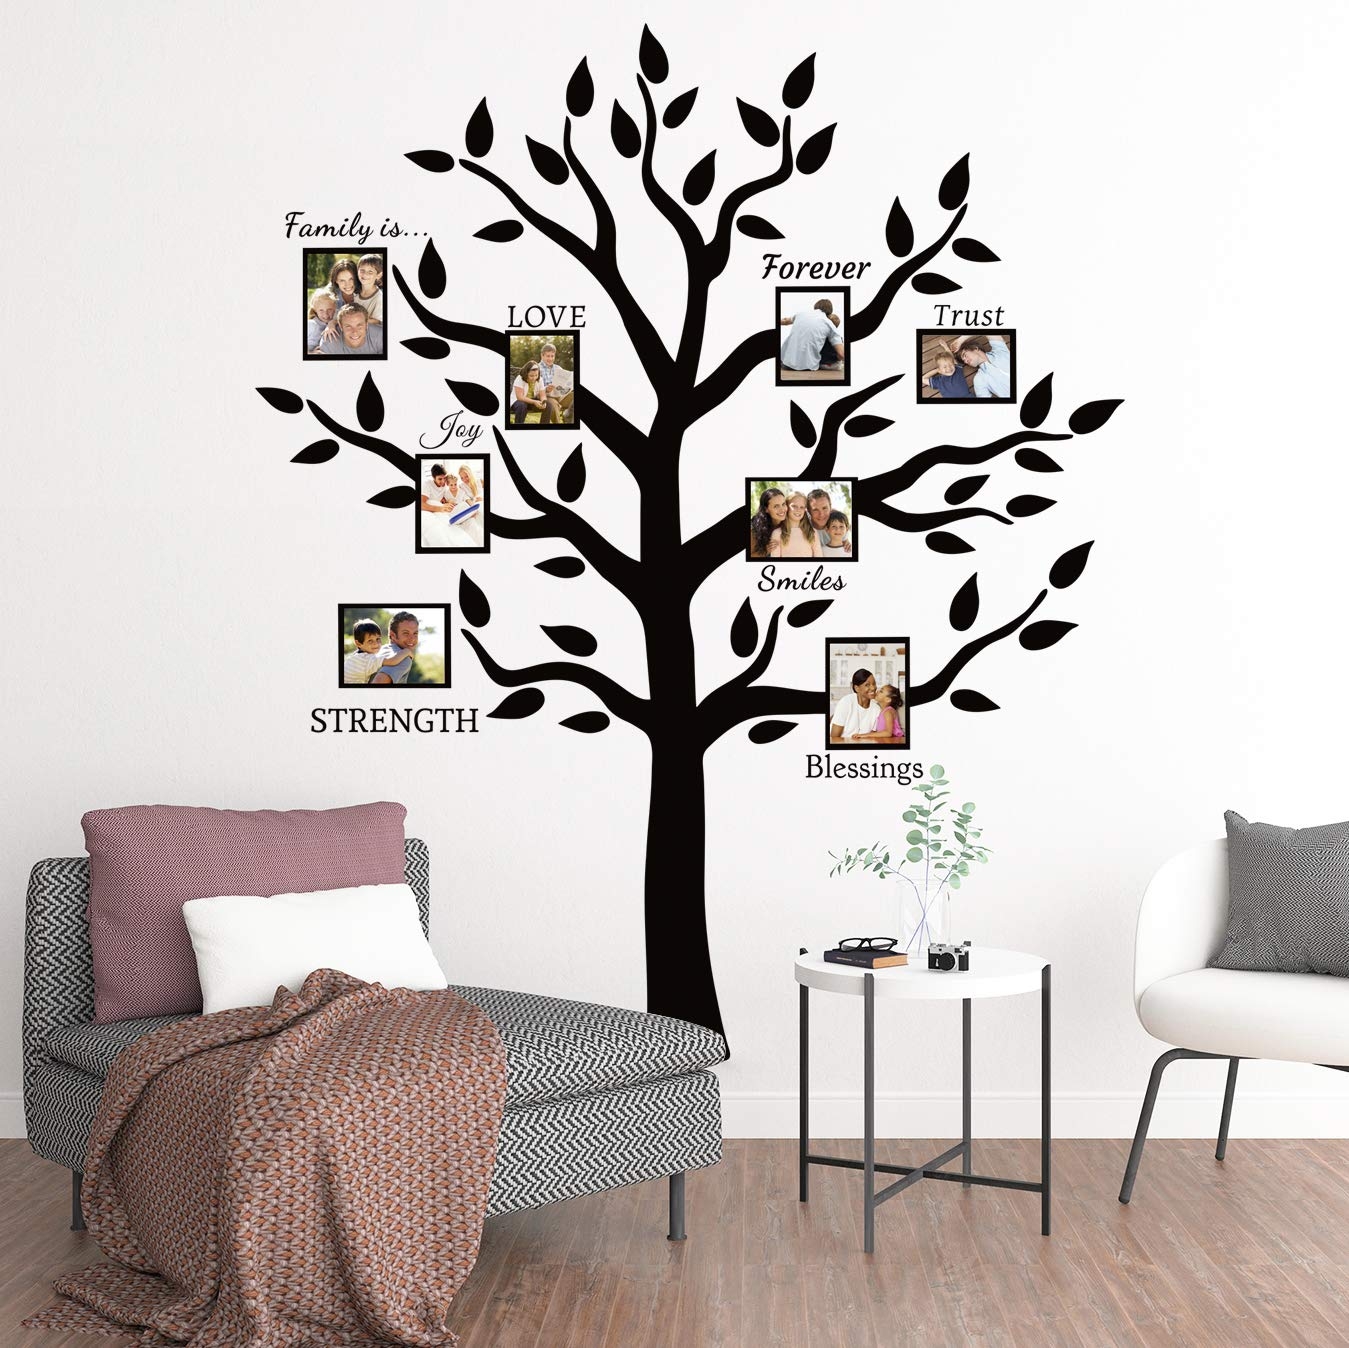 FAMILY WALL STICKER QUOTE BEDROOM LOUNGE WALL ART DECAL X366 